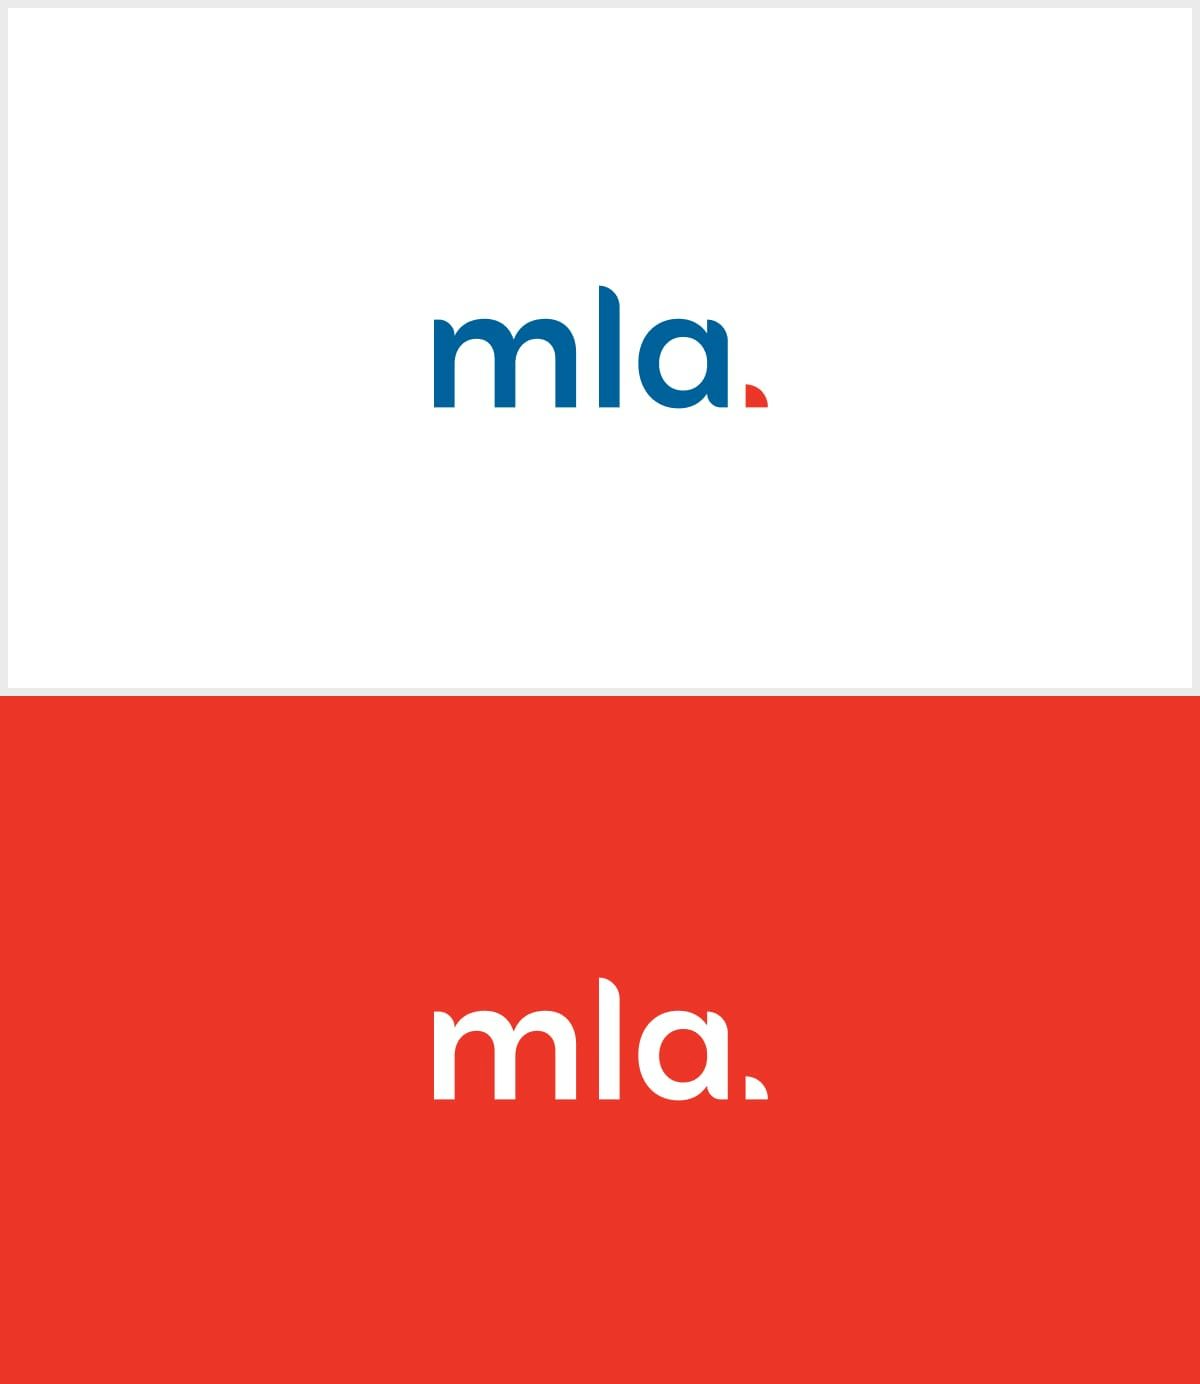 MLA Law brand colour applications